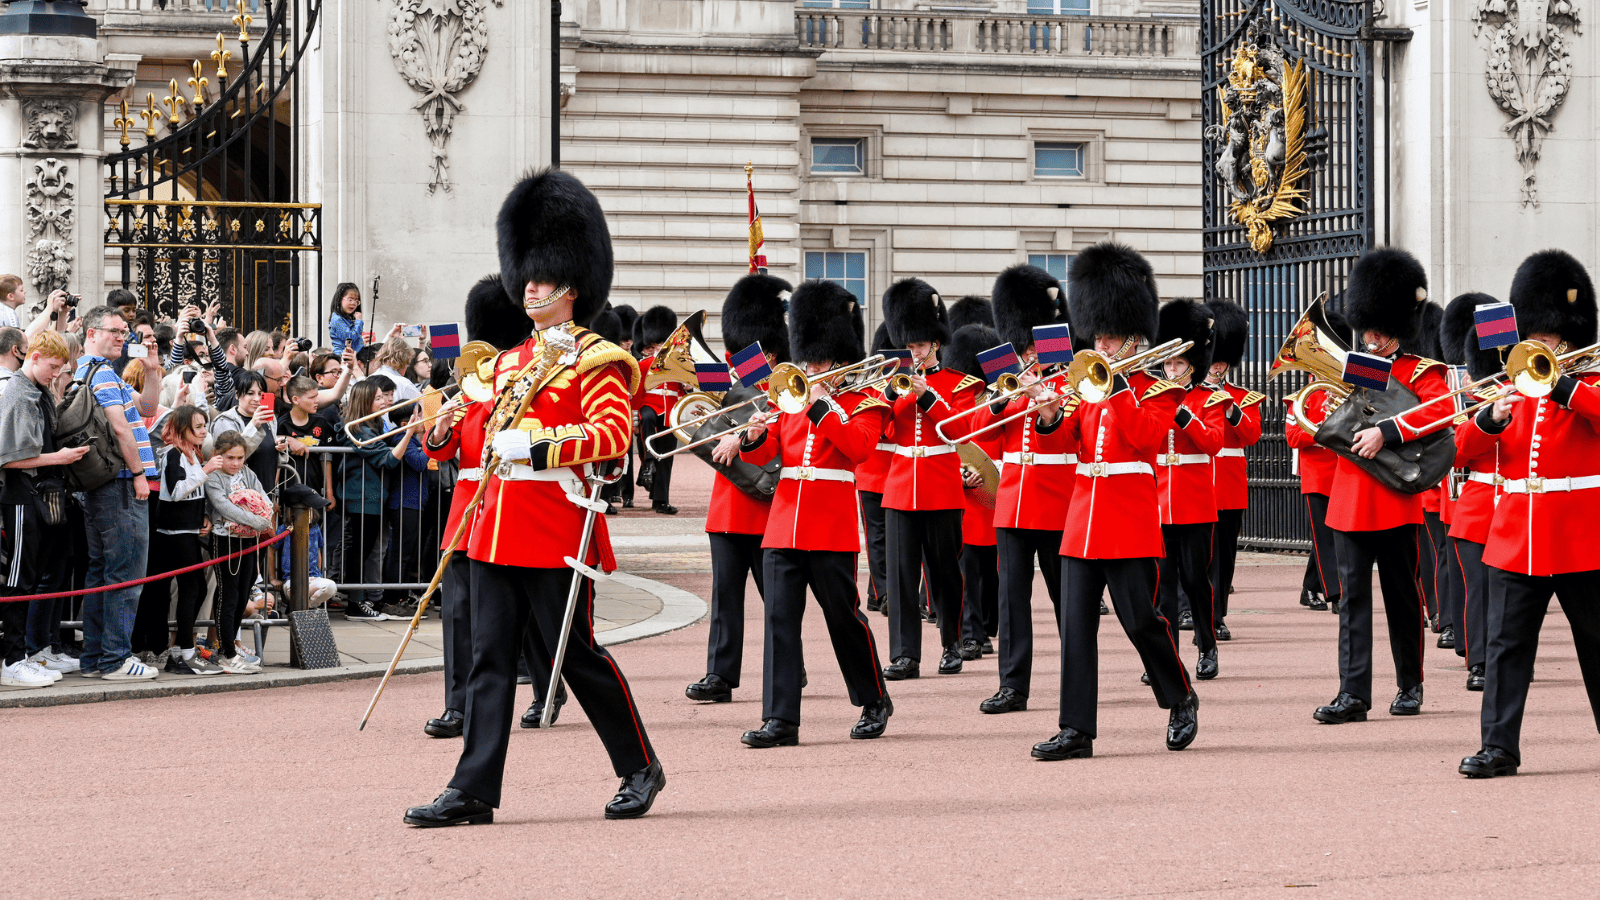 London’s Worst Tourists Traps - Changing of the Guard